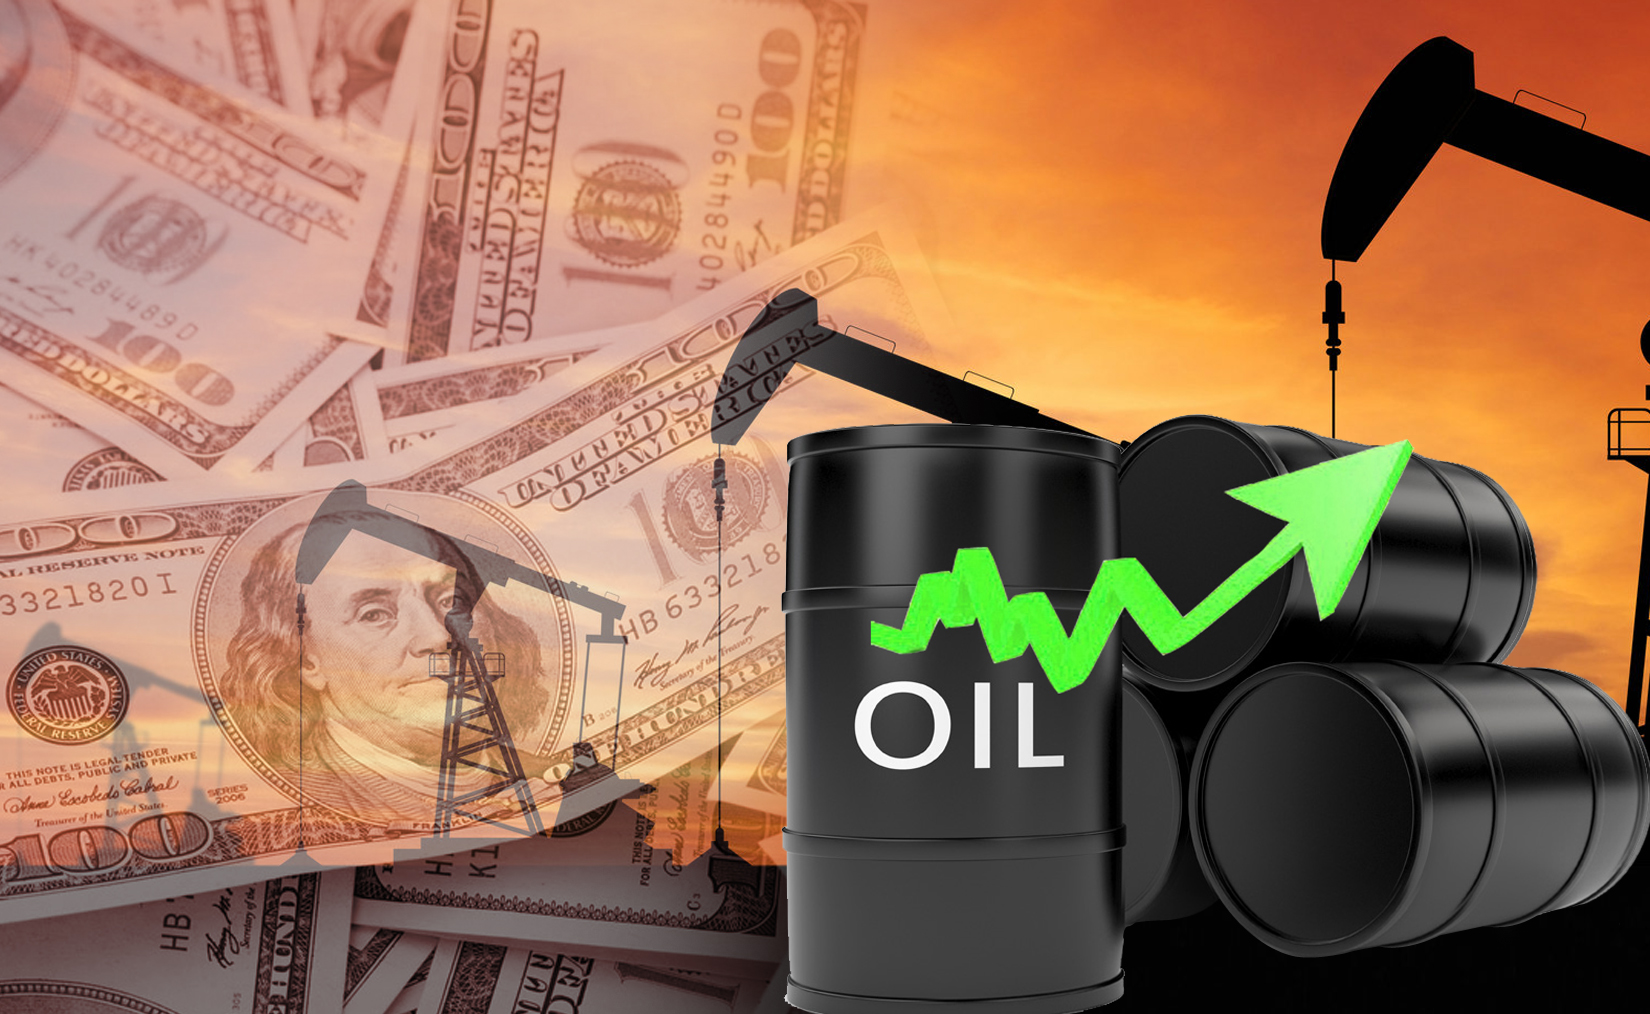 Kuwaiti oil price up 95 cents to stand at USD 55.98 per barrel                                                                                                                                                                                            